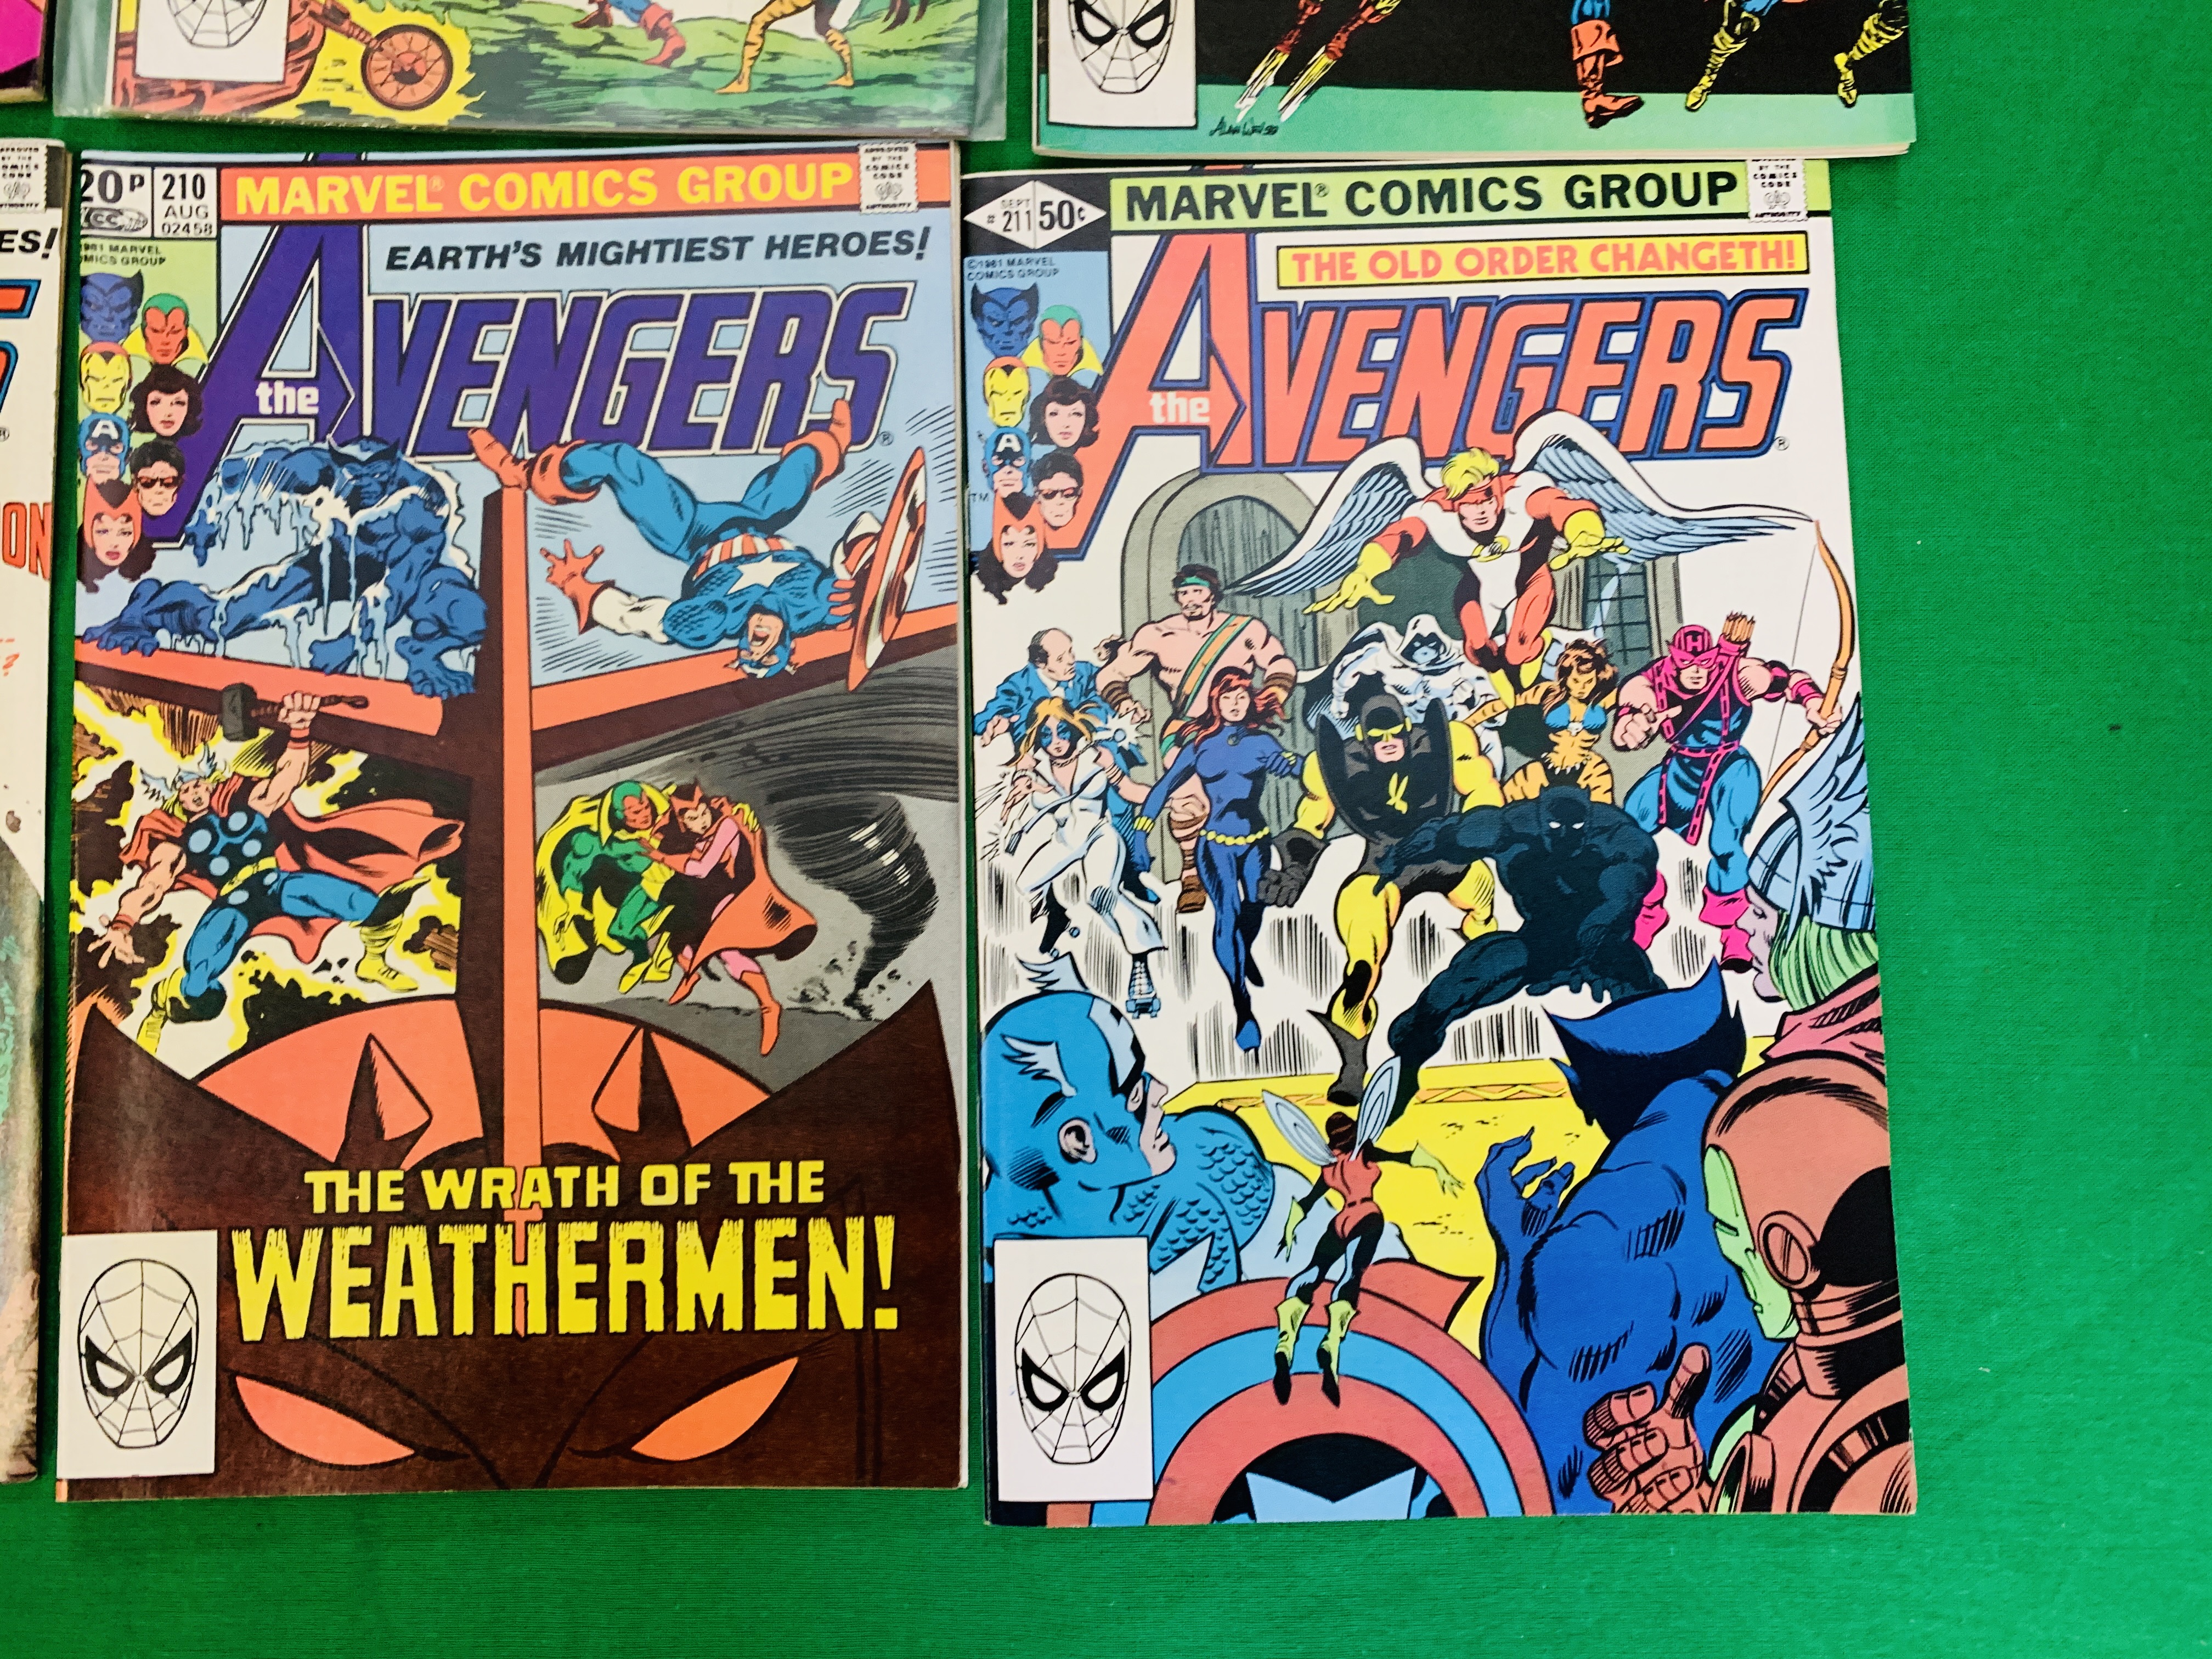 MARVEL COMICS THE AVENGERS NO. 101 - 299, MISSING ISSUES 103 AND 110. - Image 80 of 130